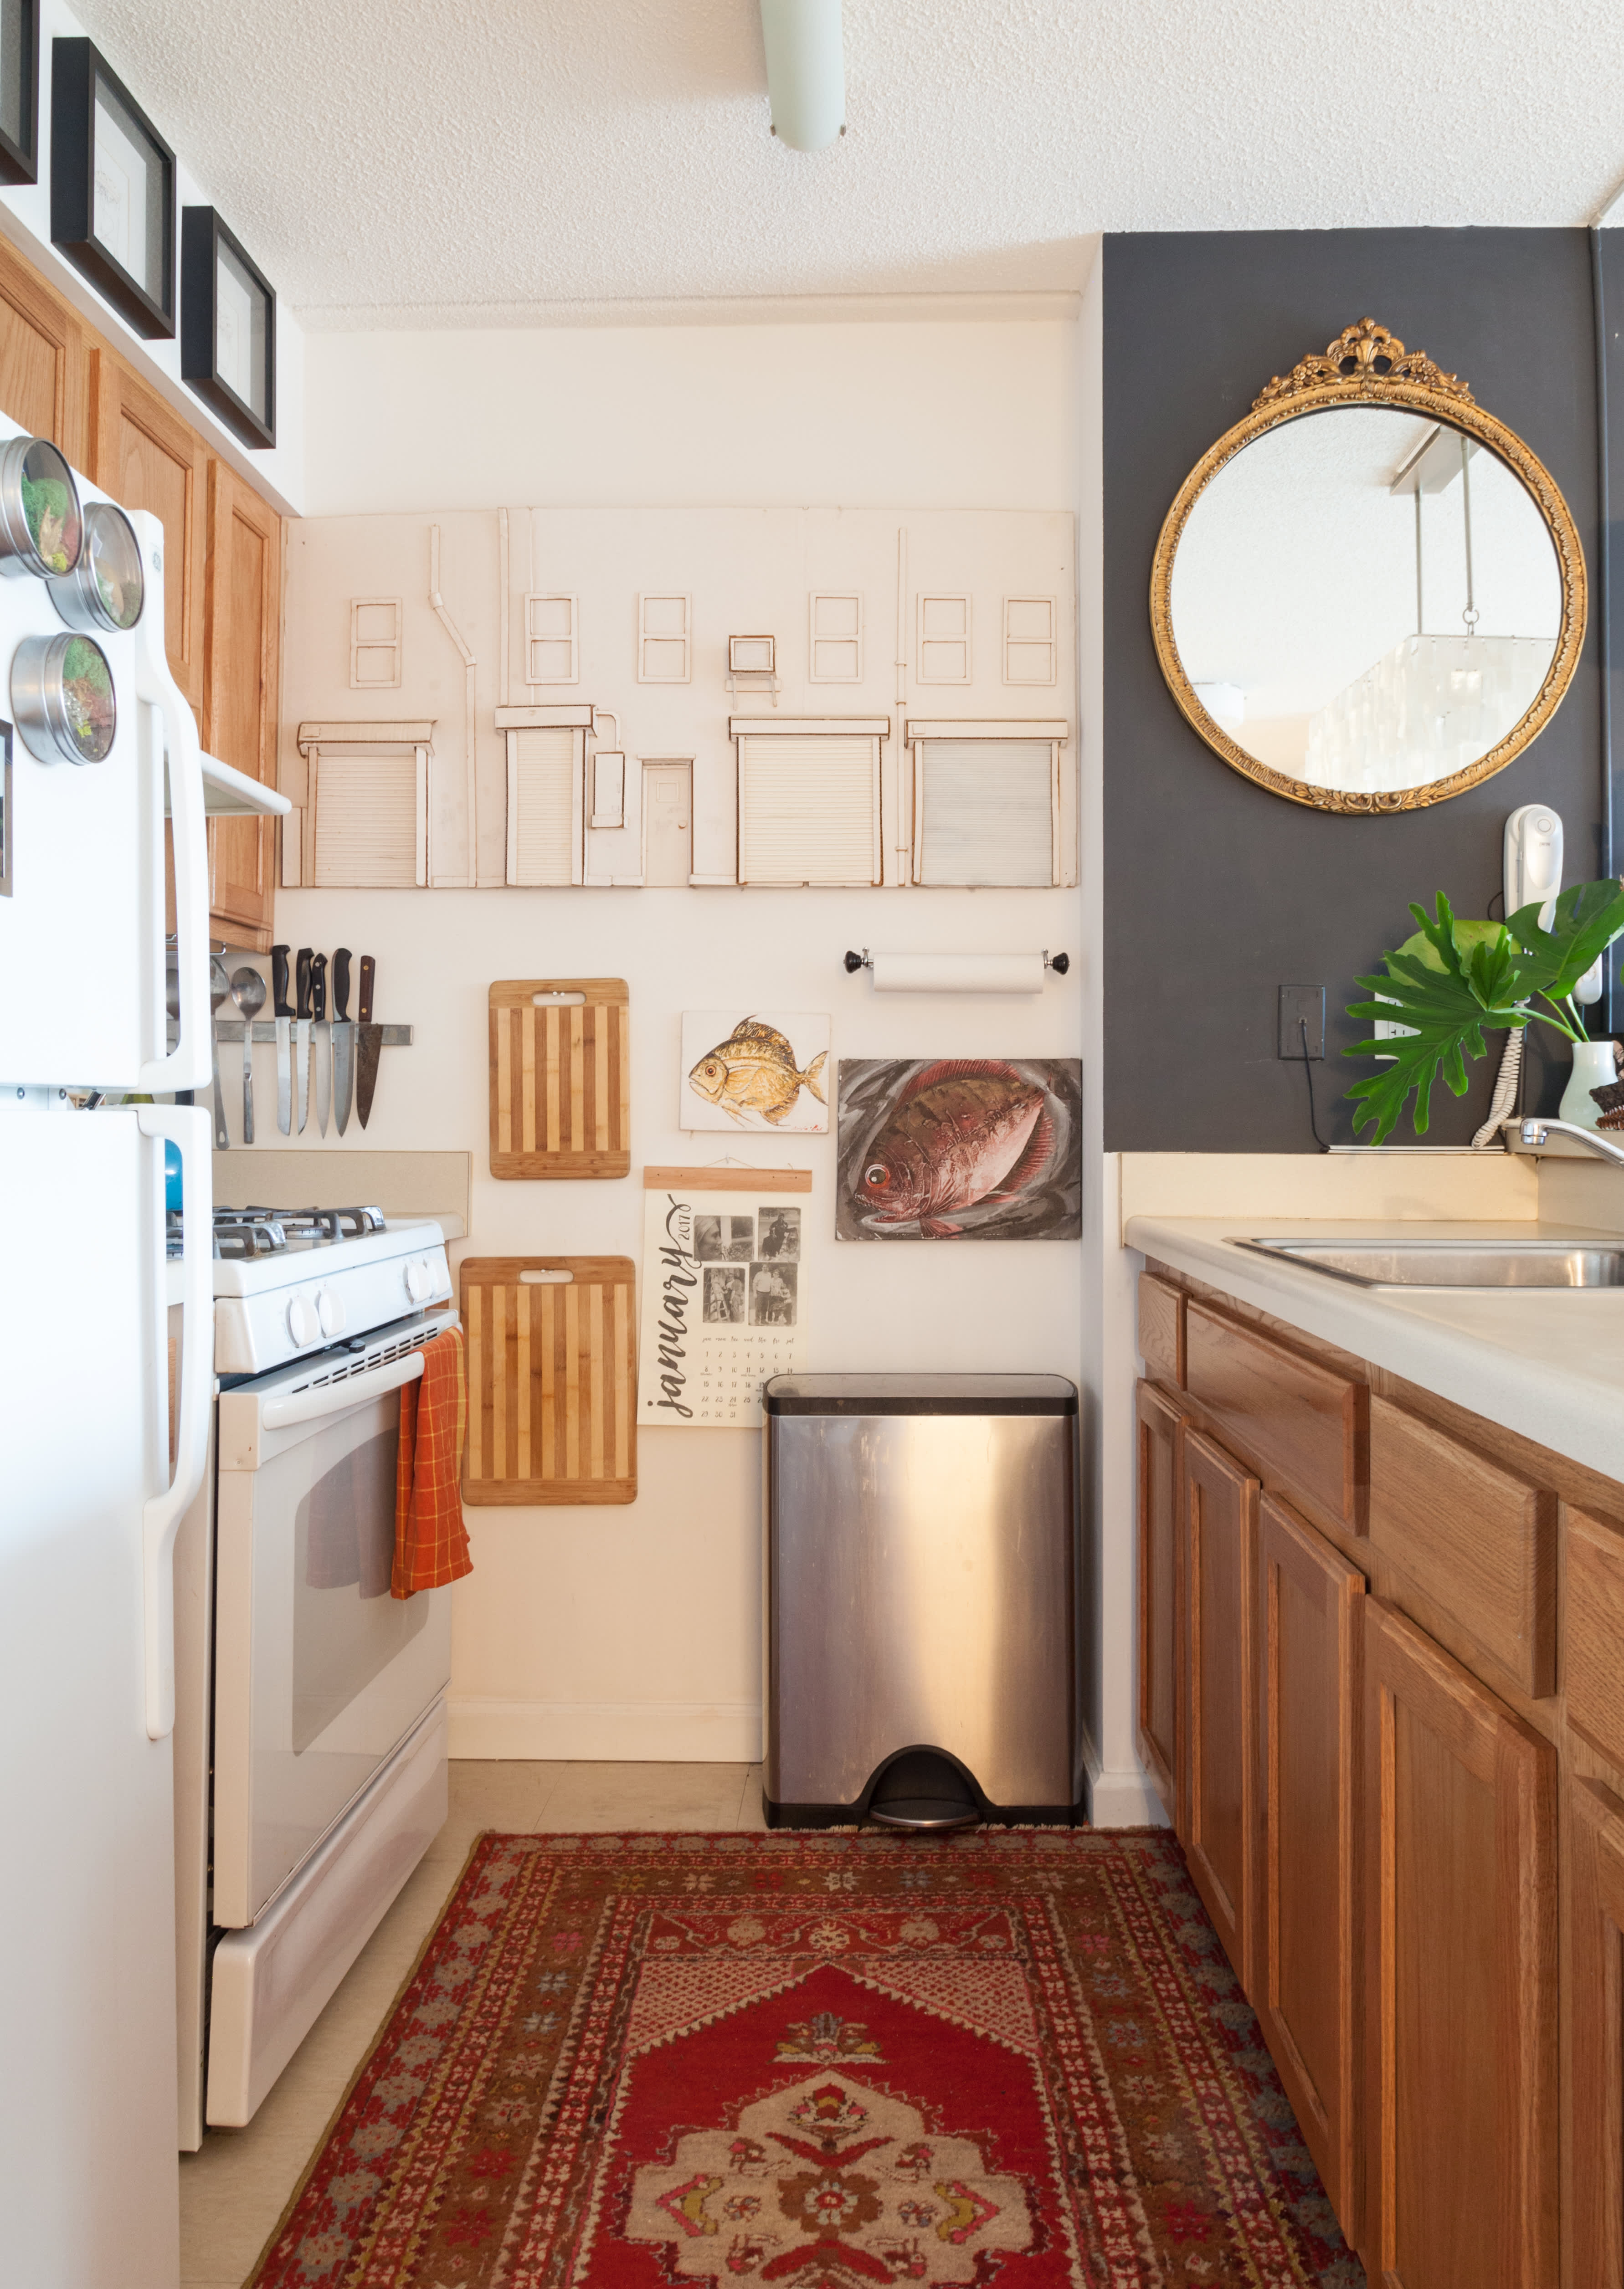 24 Small-Kitchen Storage Ideas to Help You Maximize Your Space